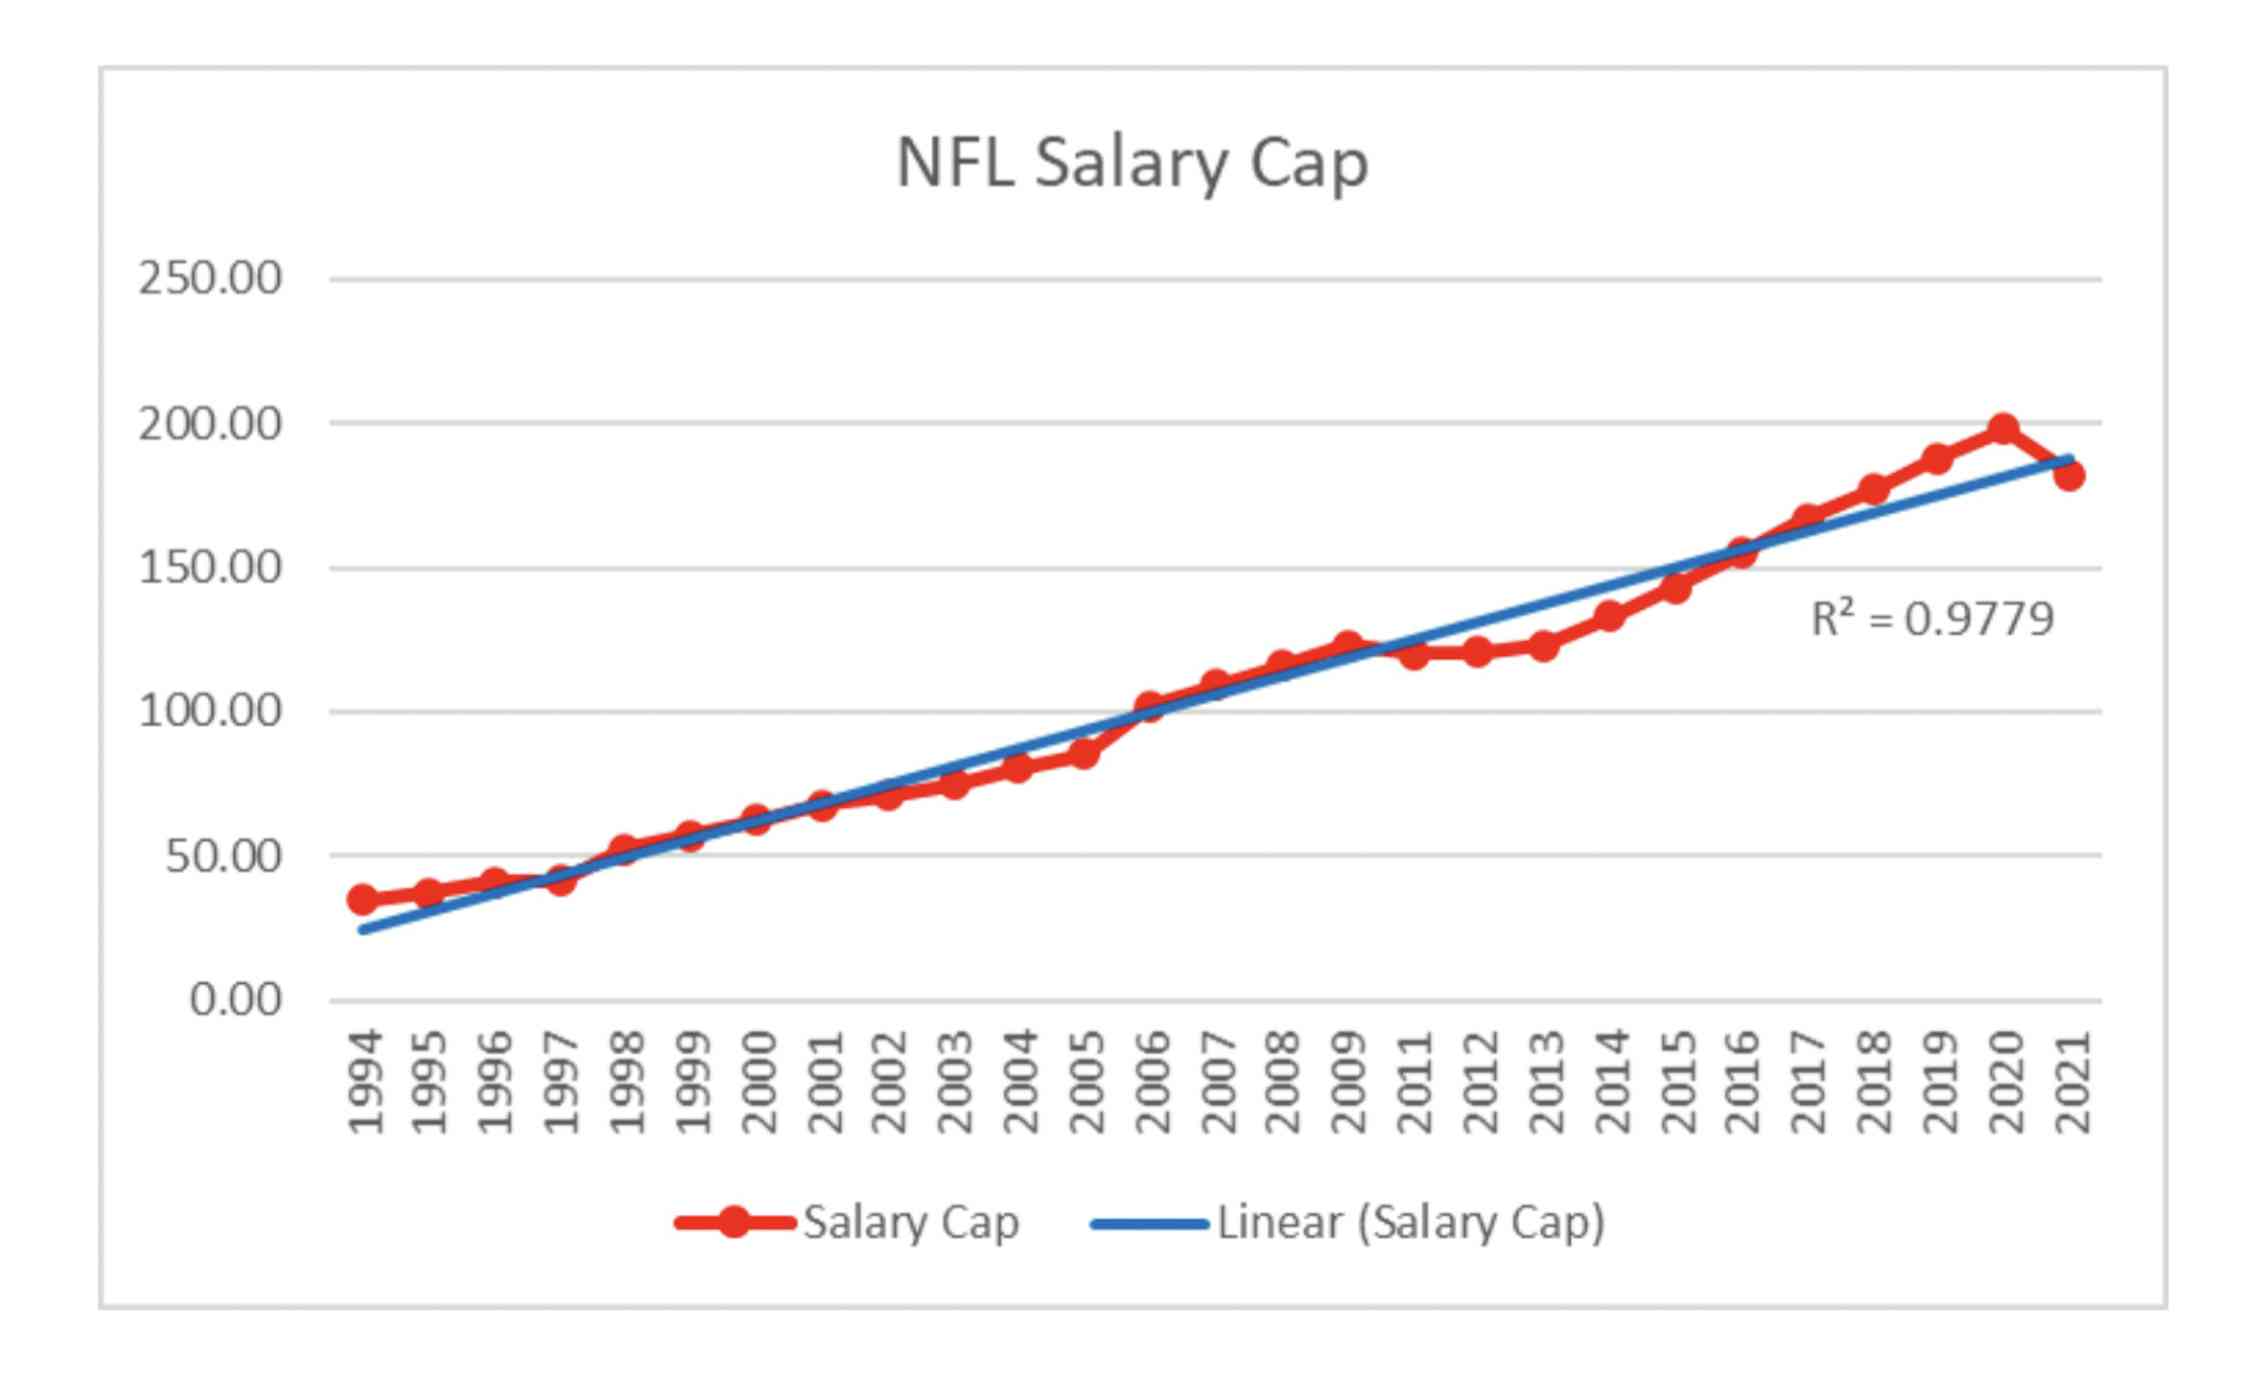 NFL and NHL salary caps have worked out well for players